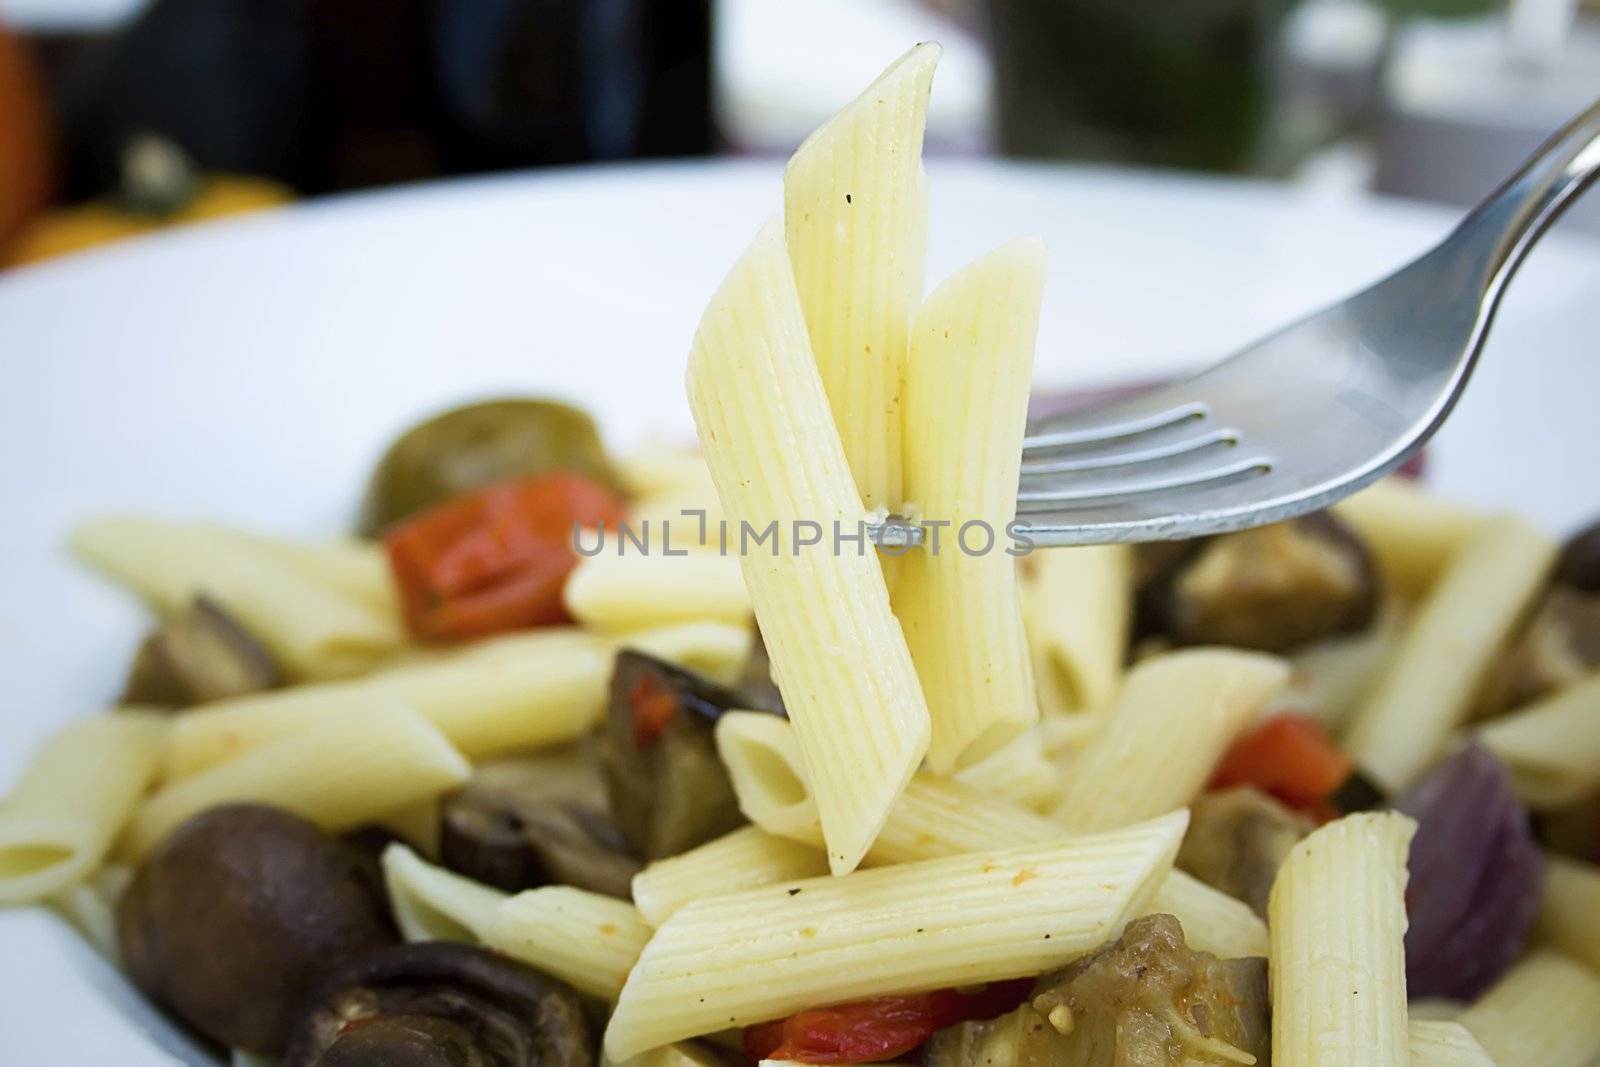 Several pieces of penne pasta on fork with gourmet pasta dish in background.  